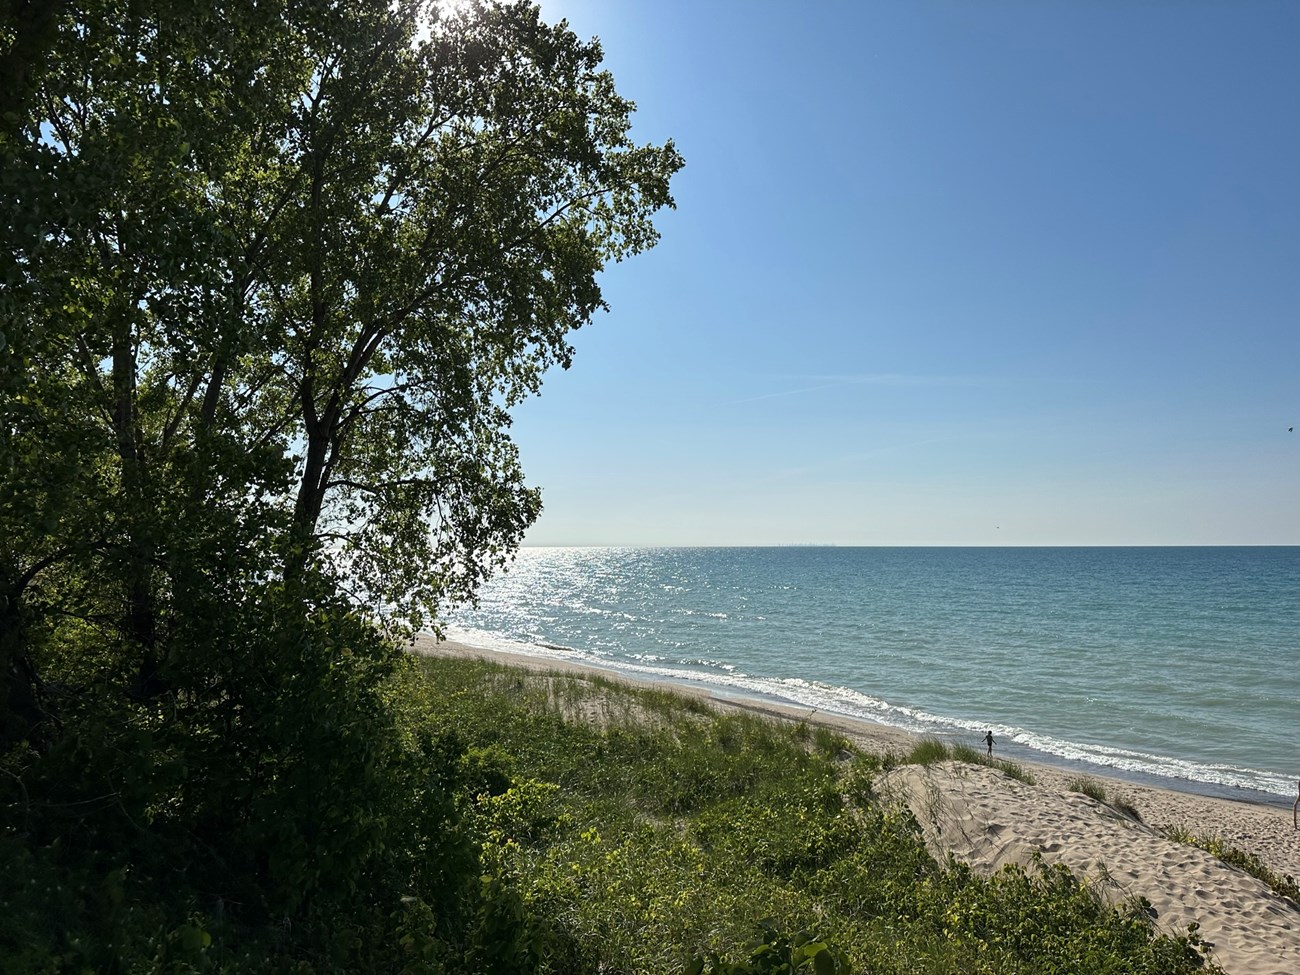 Sandy beach along the glistening blue waters of Lake Michigan. Blue sky above the lake. A ridge of sand along the beach has grassy vegetation and sporadic trees.